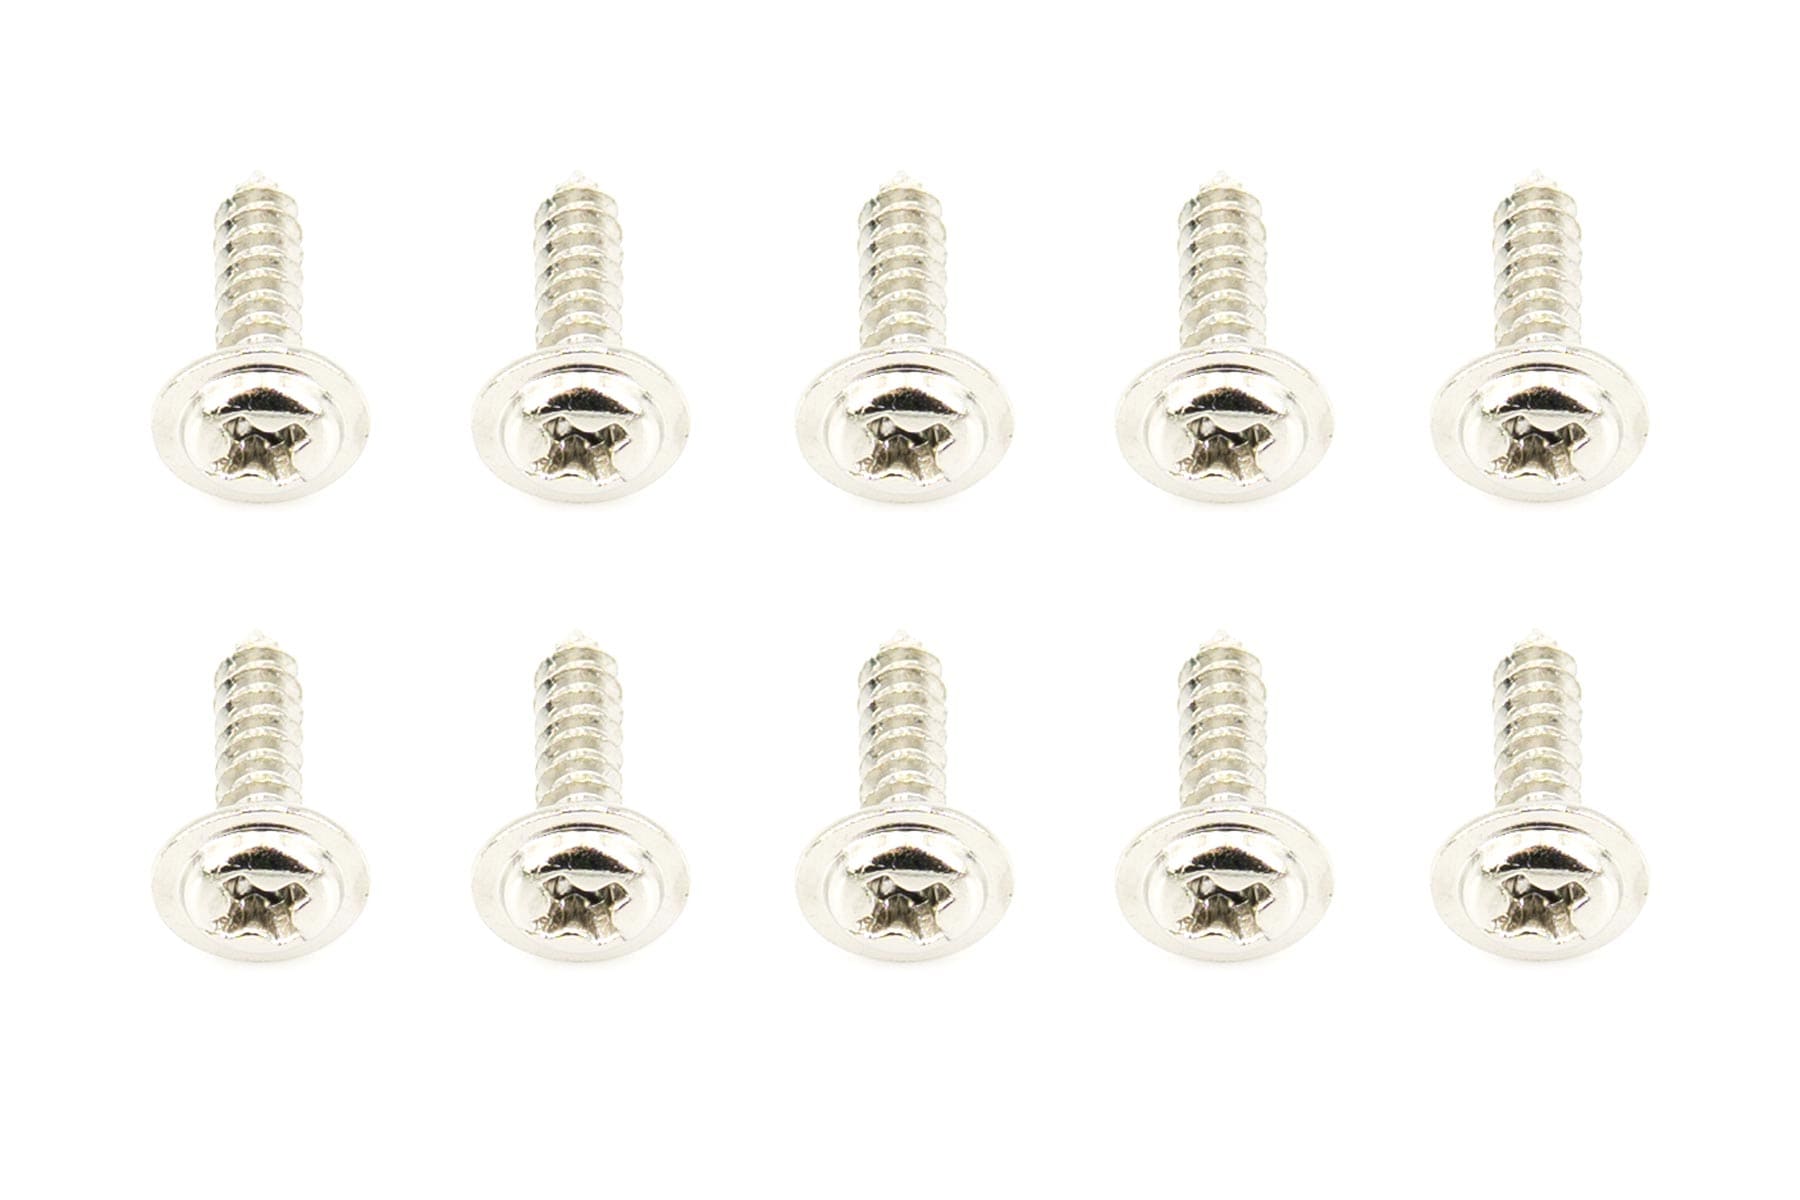 BenchCraft 3mm x 12mm Self-Tapping Washer Head Screws (10 Pack)